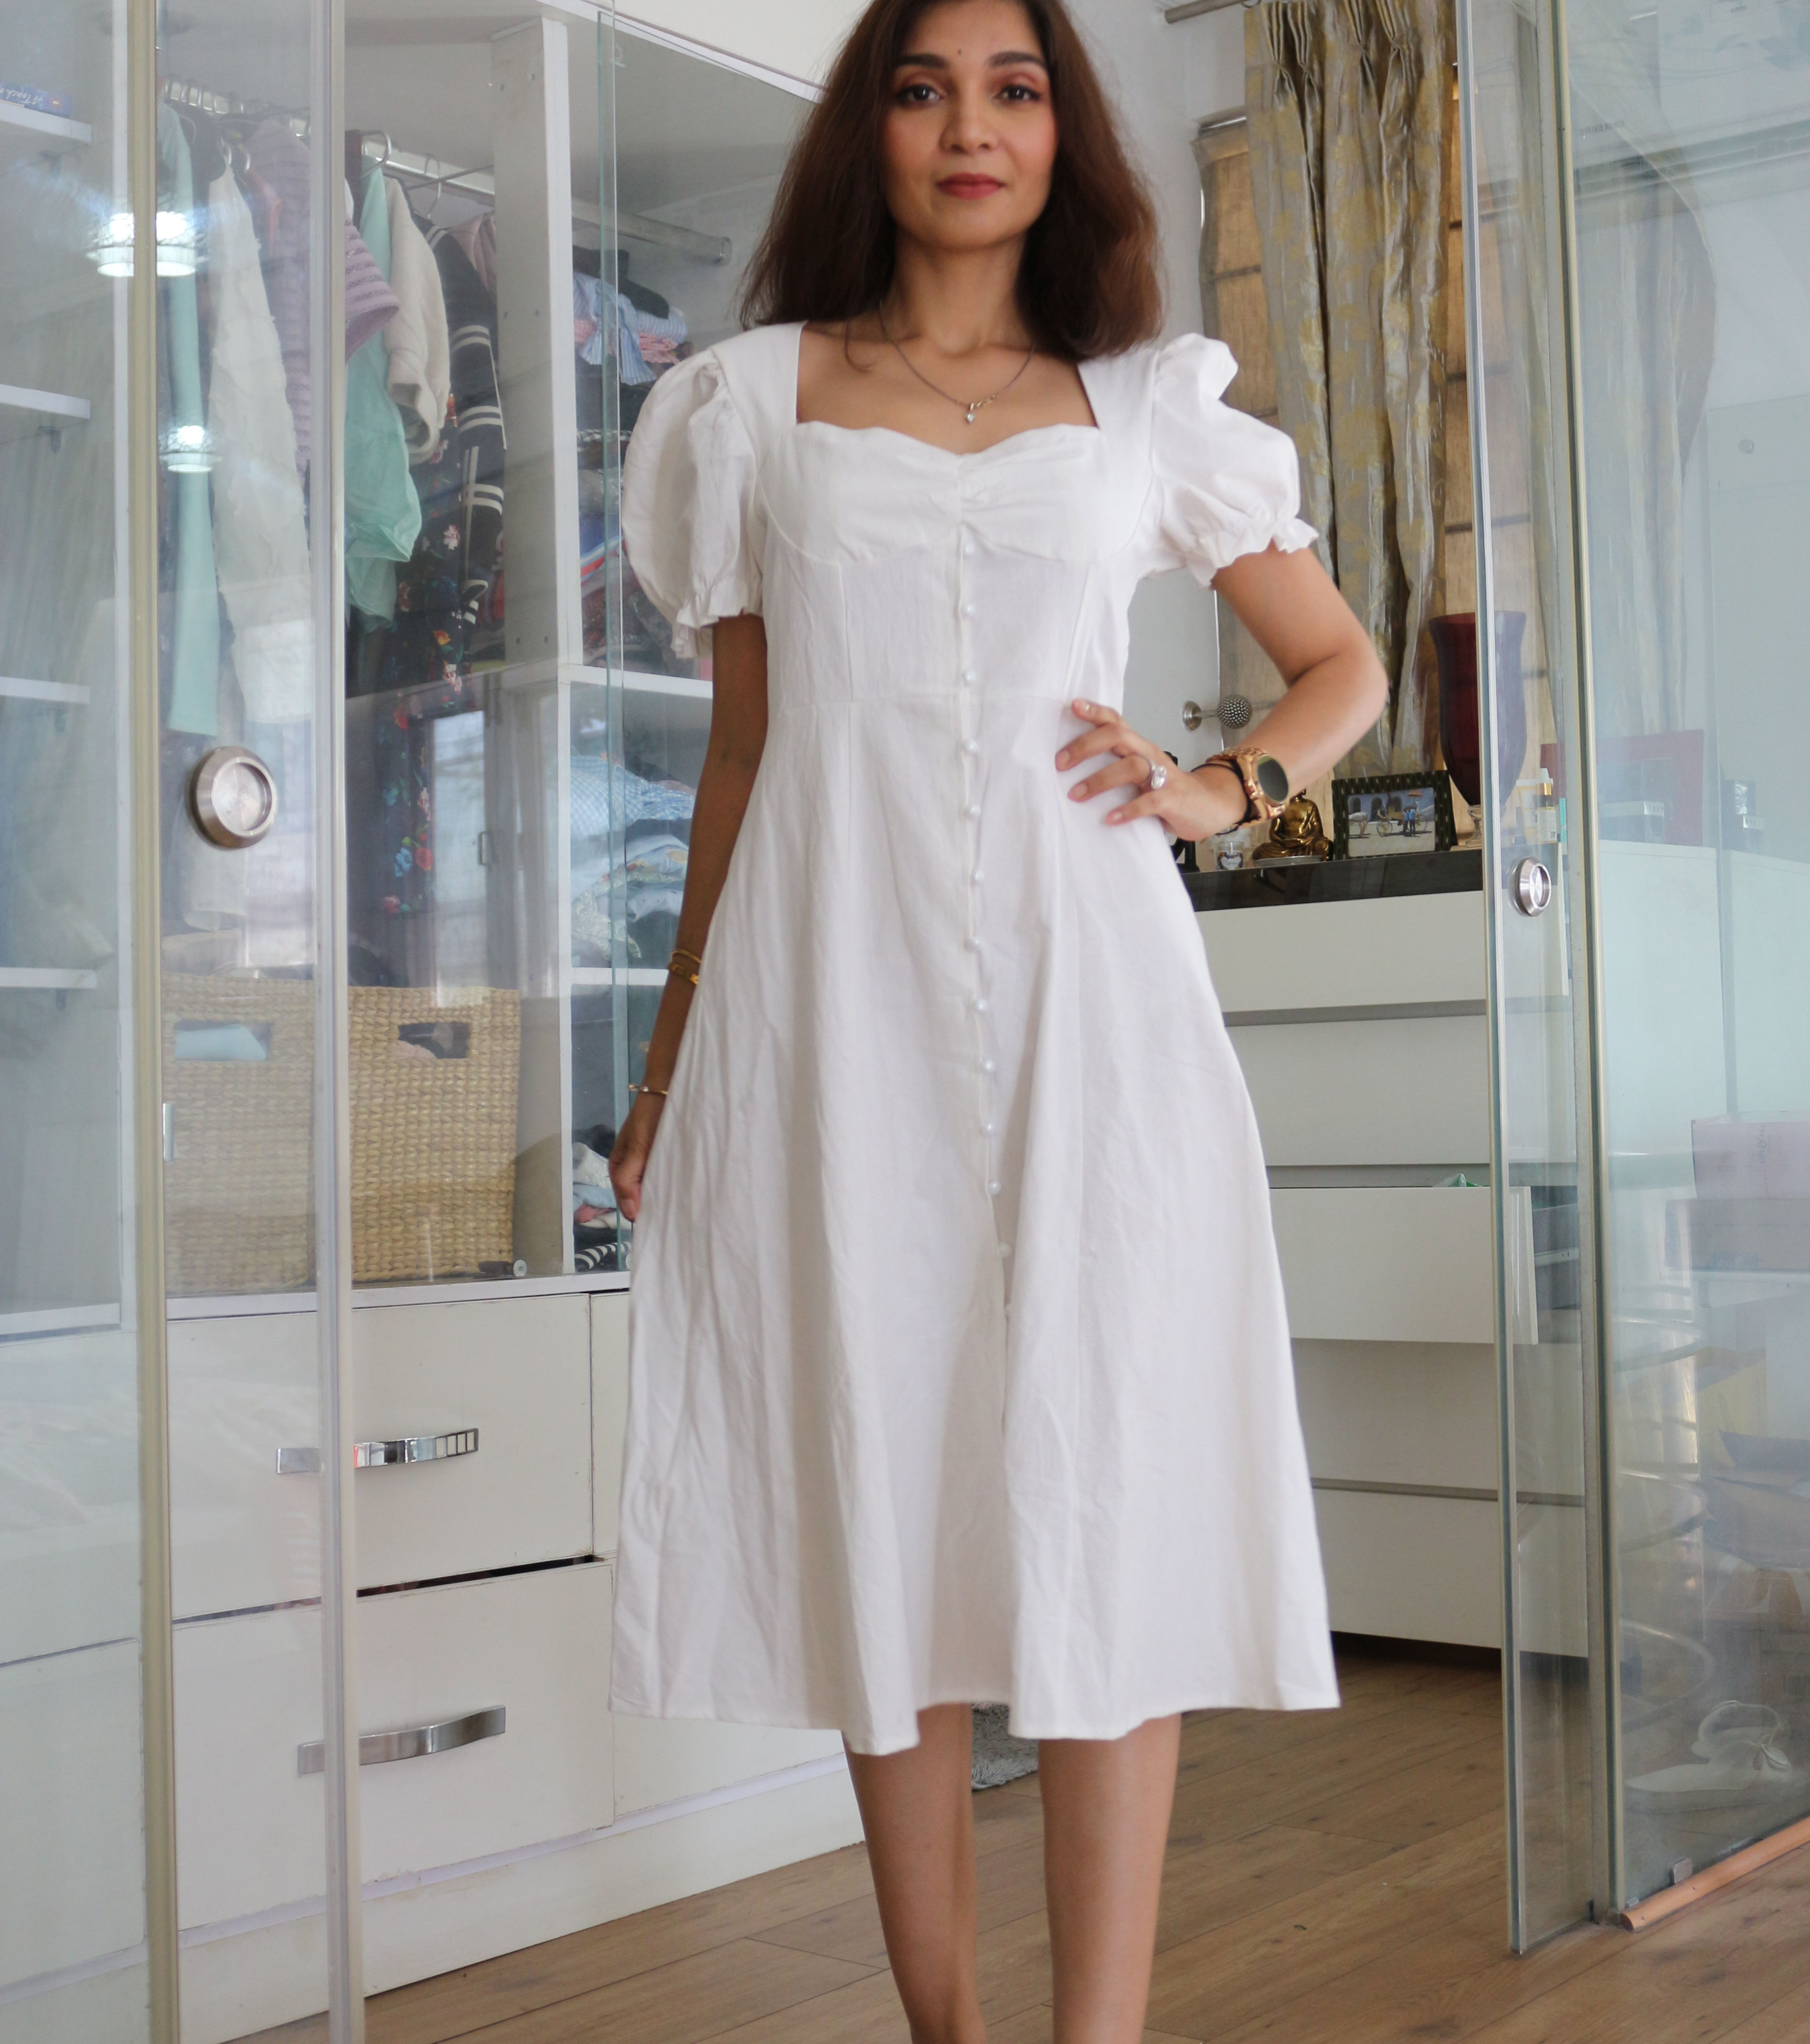 Ruched A-Line Dress